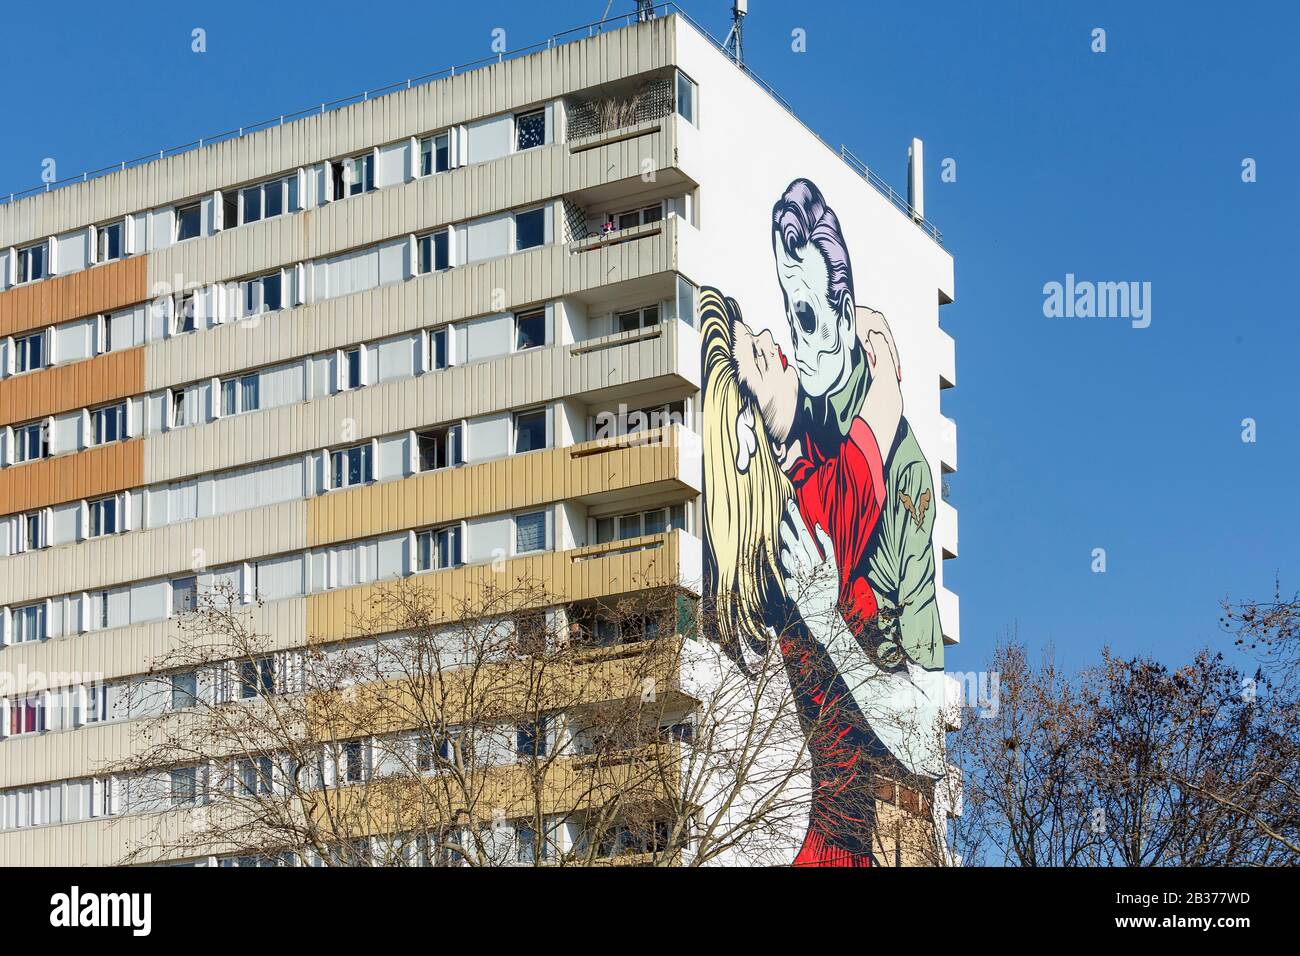 France, Paris, mural in Place Pinel called Love won't tear us apart by artist D*face Stock Photo